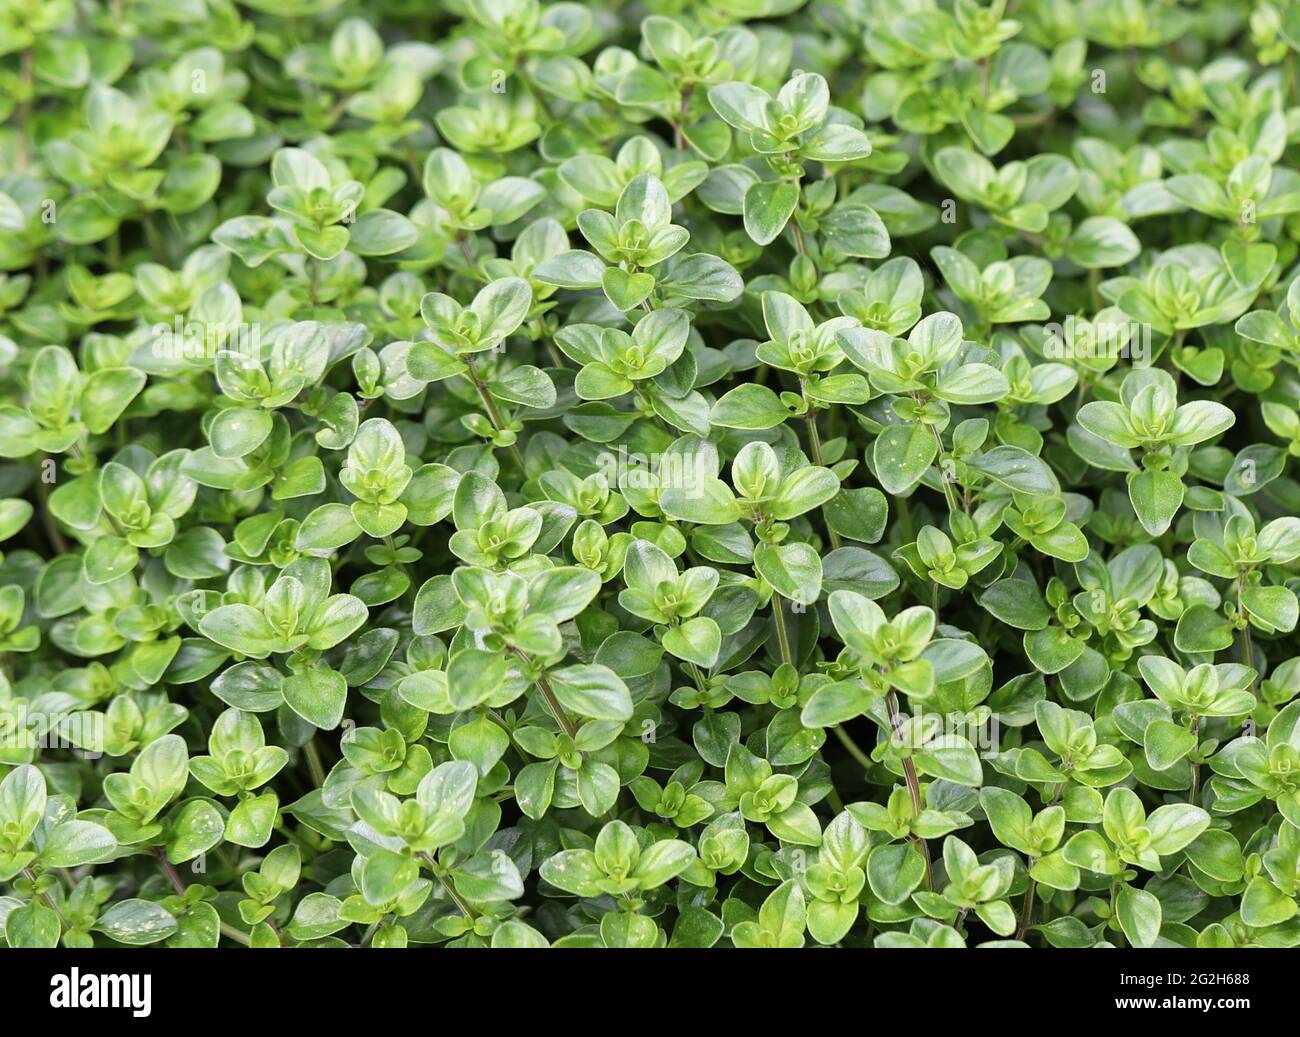 Thyme - culinary herb Stock Photo